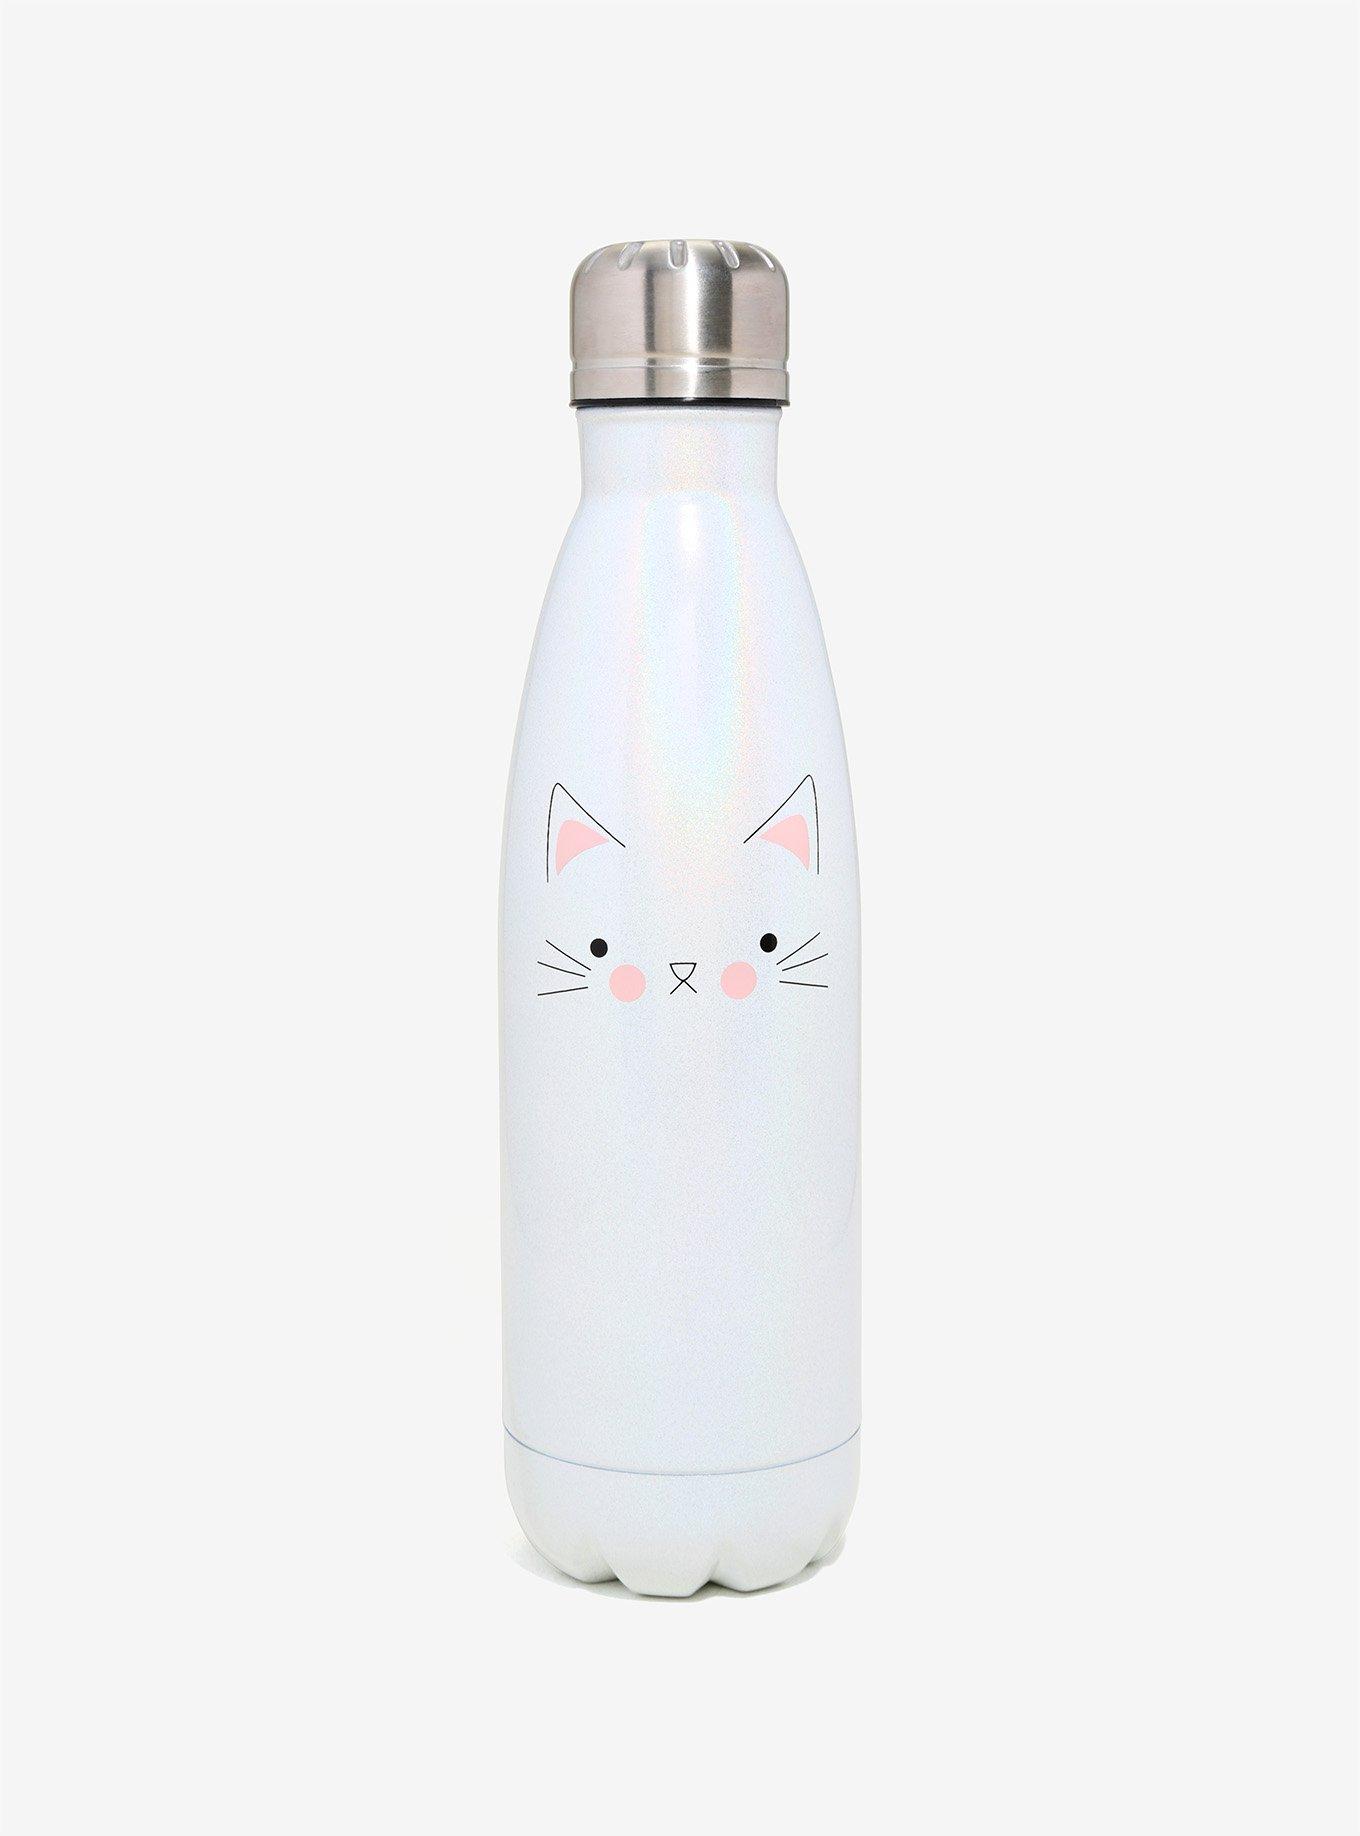 Pure Pearlized White Cat Water Bottle - BoxLunch Exclusive, , hi-res